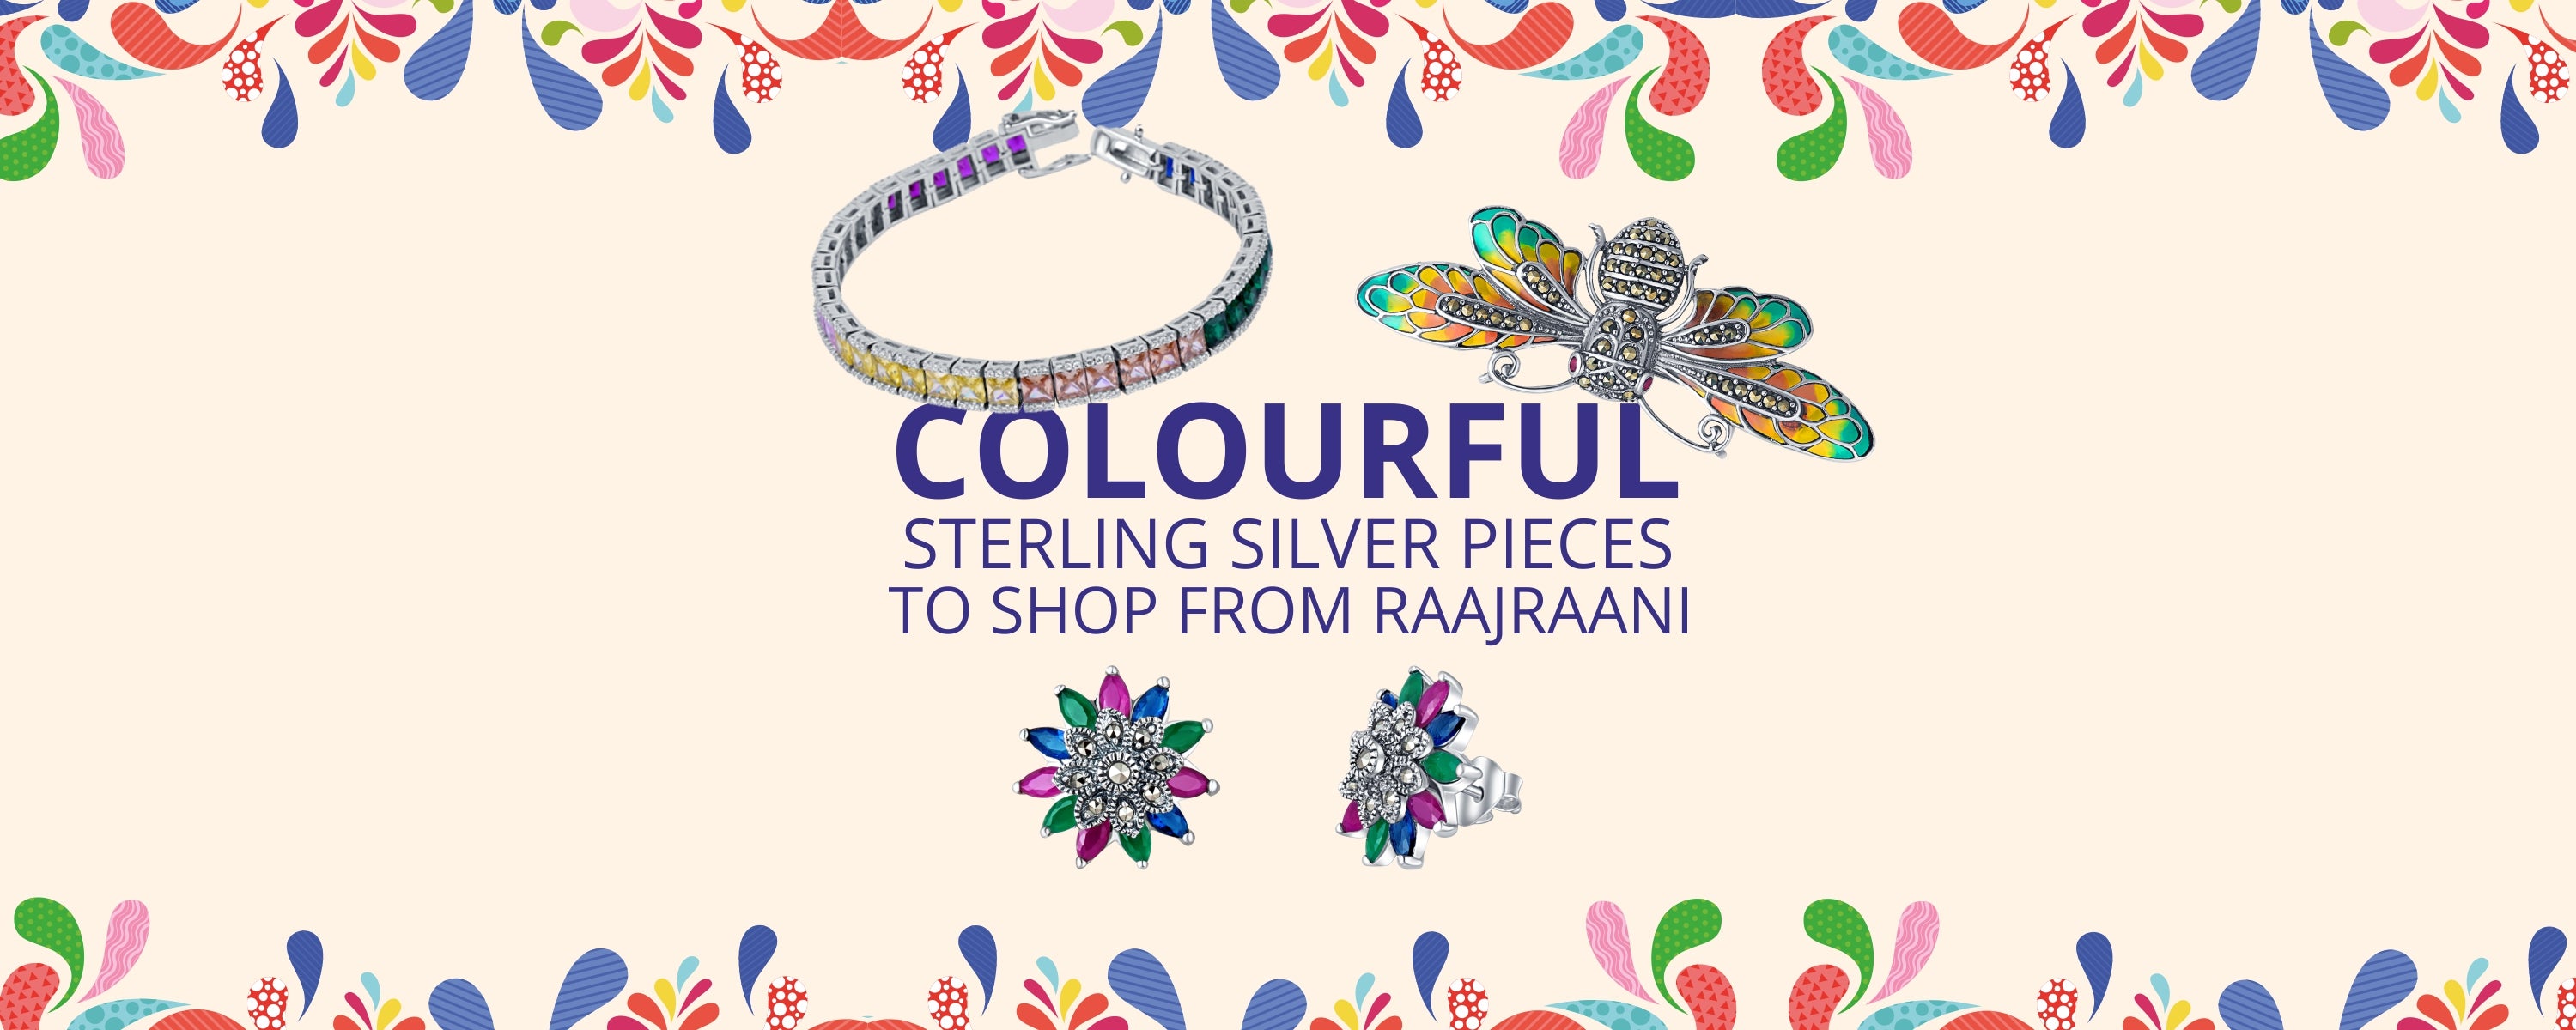 Colourful Sterling Silver Pieces to Shop from Raajraani